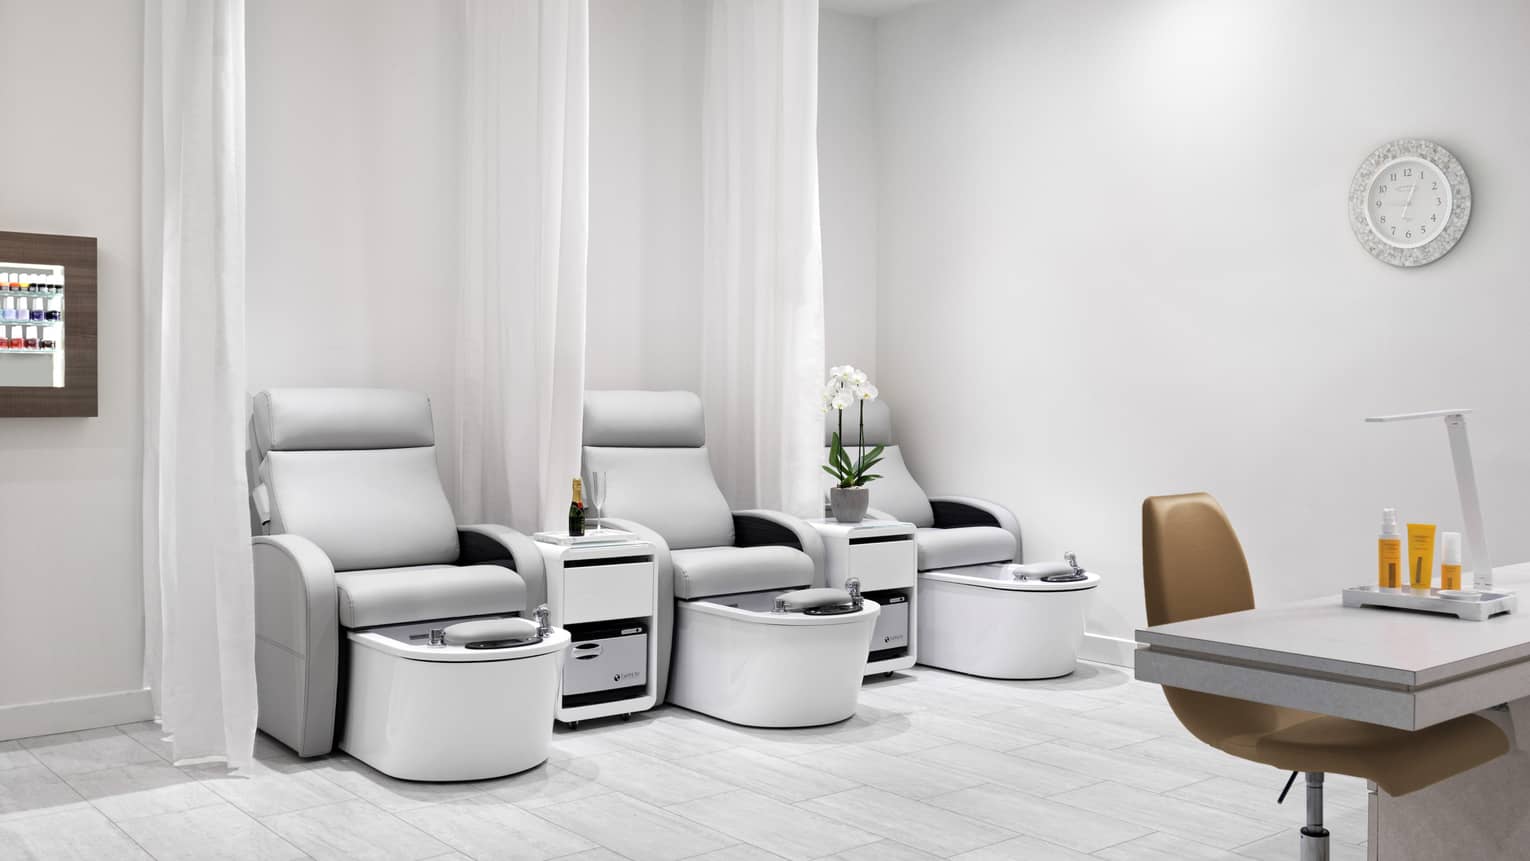 Nail salon with three light grey pedicure chairs, separate by white curtains, and one manicure station